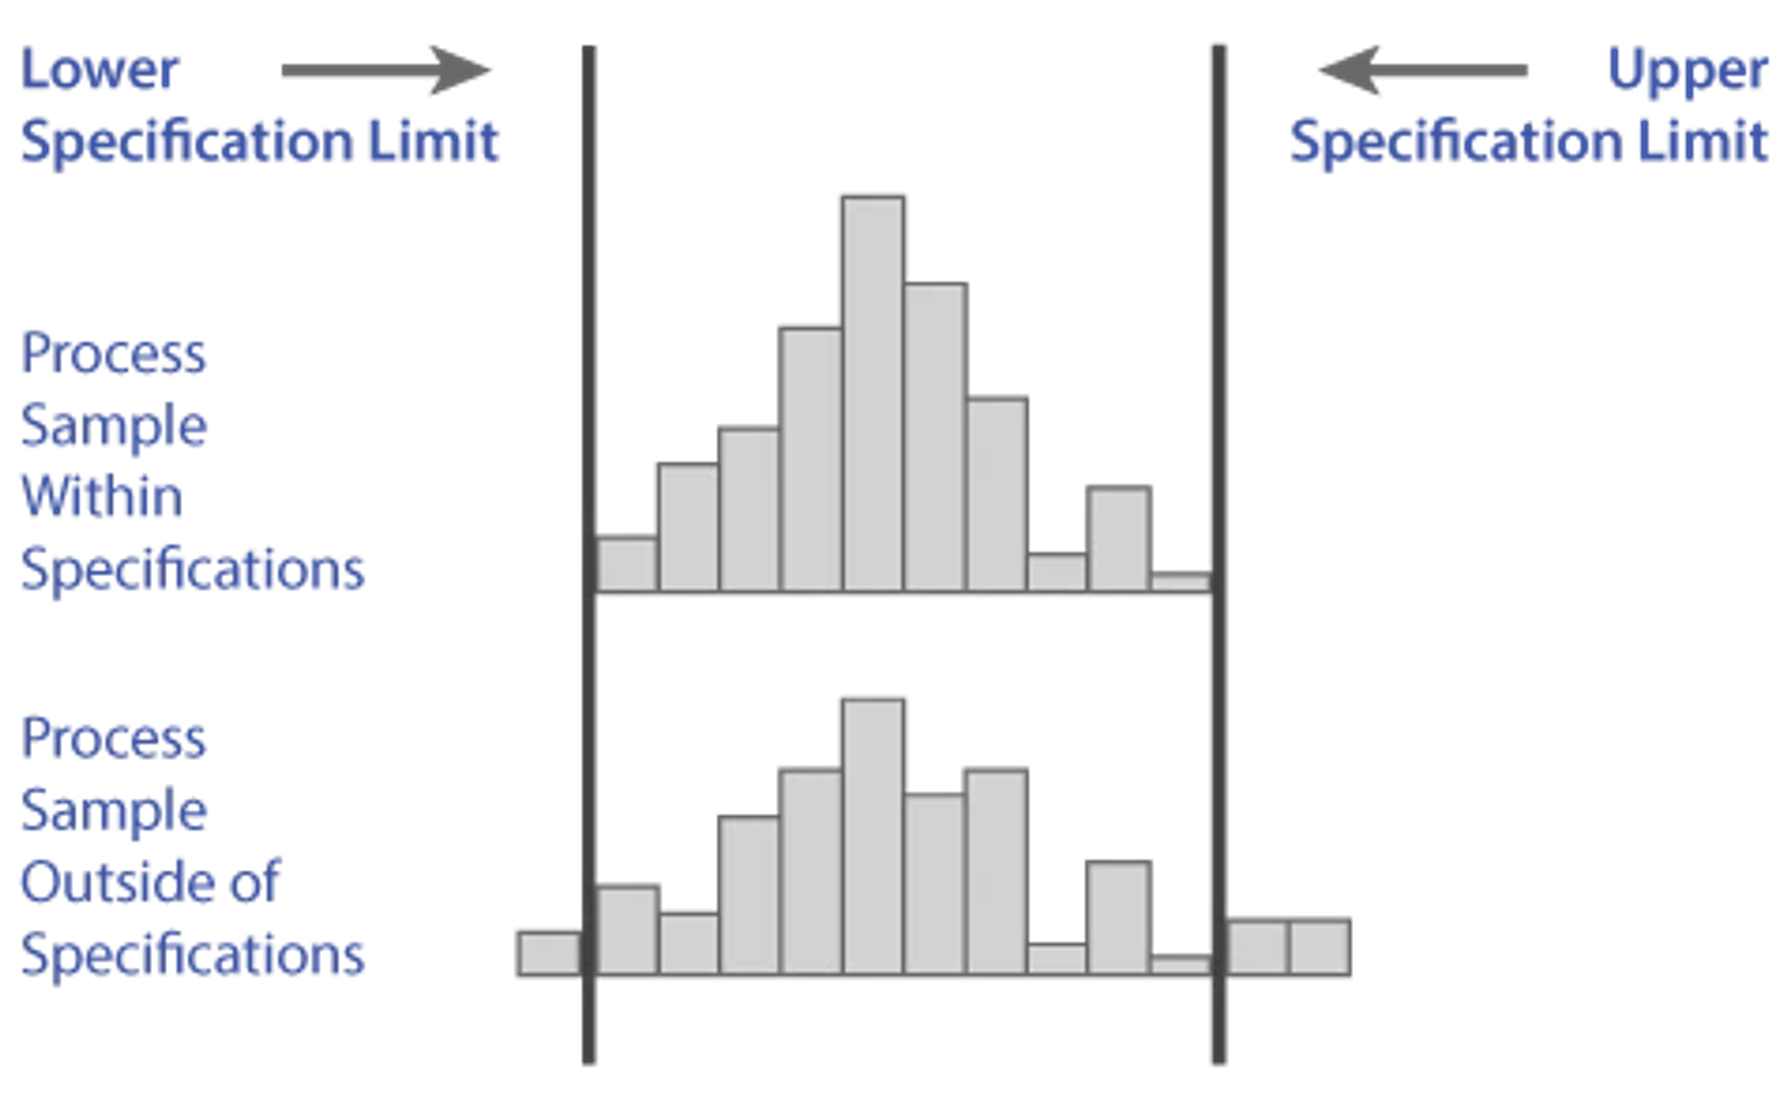 Upper specification limit vs. lower specification limit